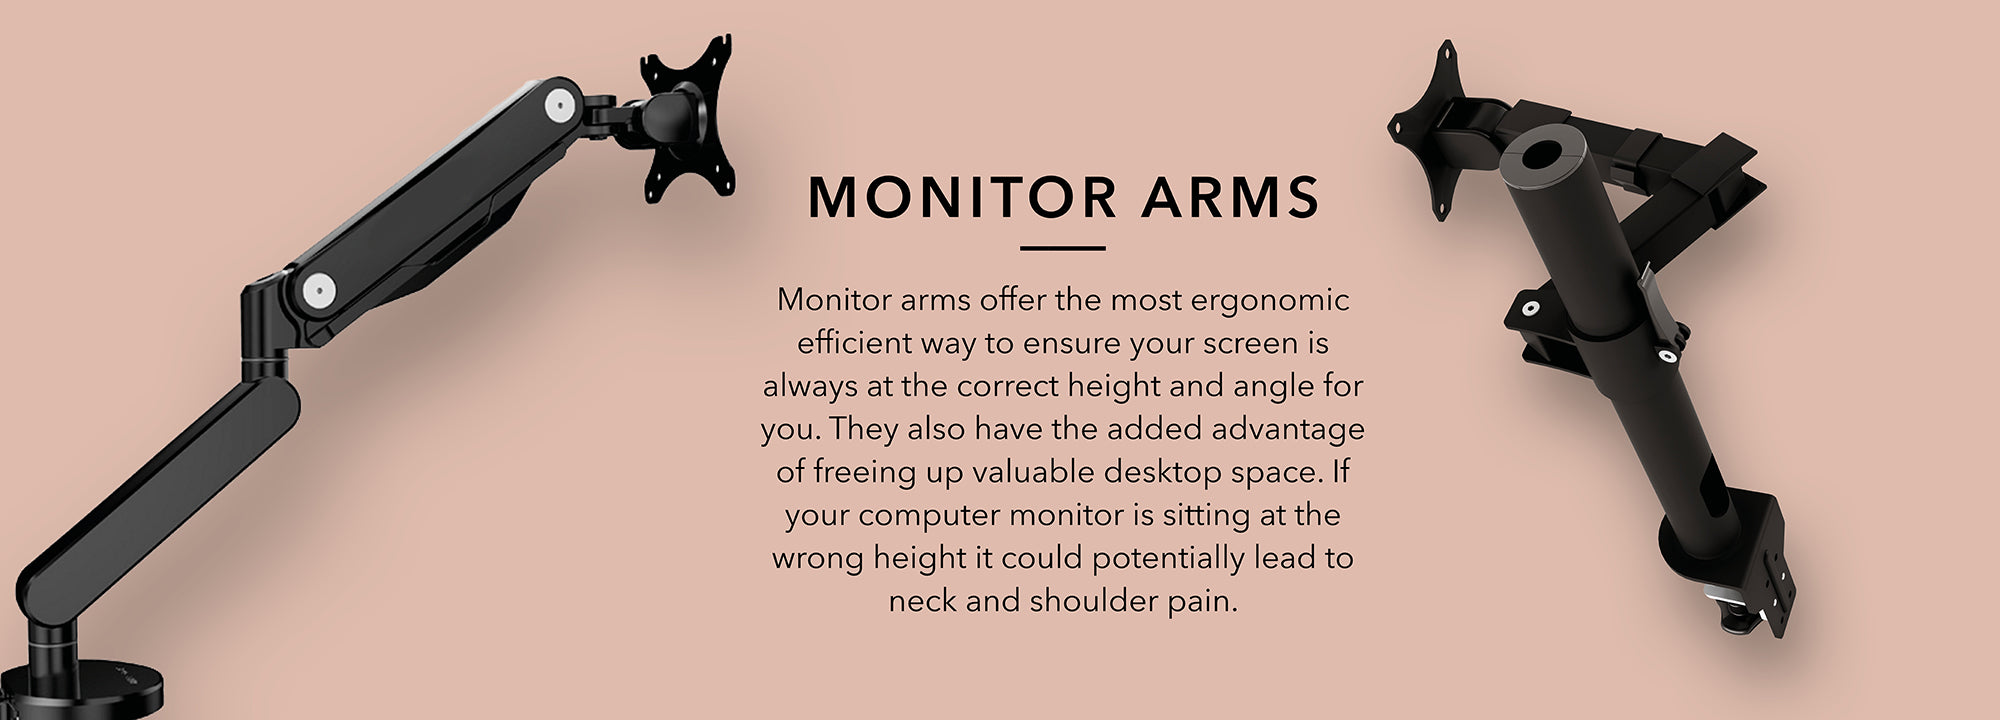 Monitor arms ergonomic efficient way to ensure your screen is always at the correct height